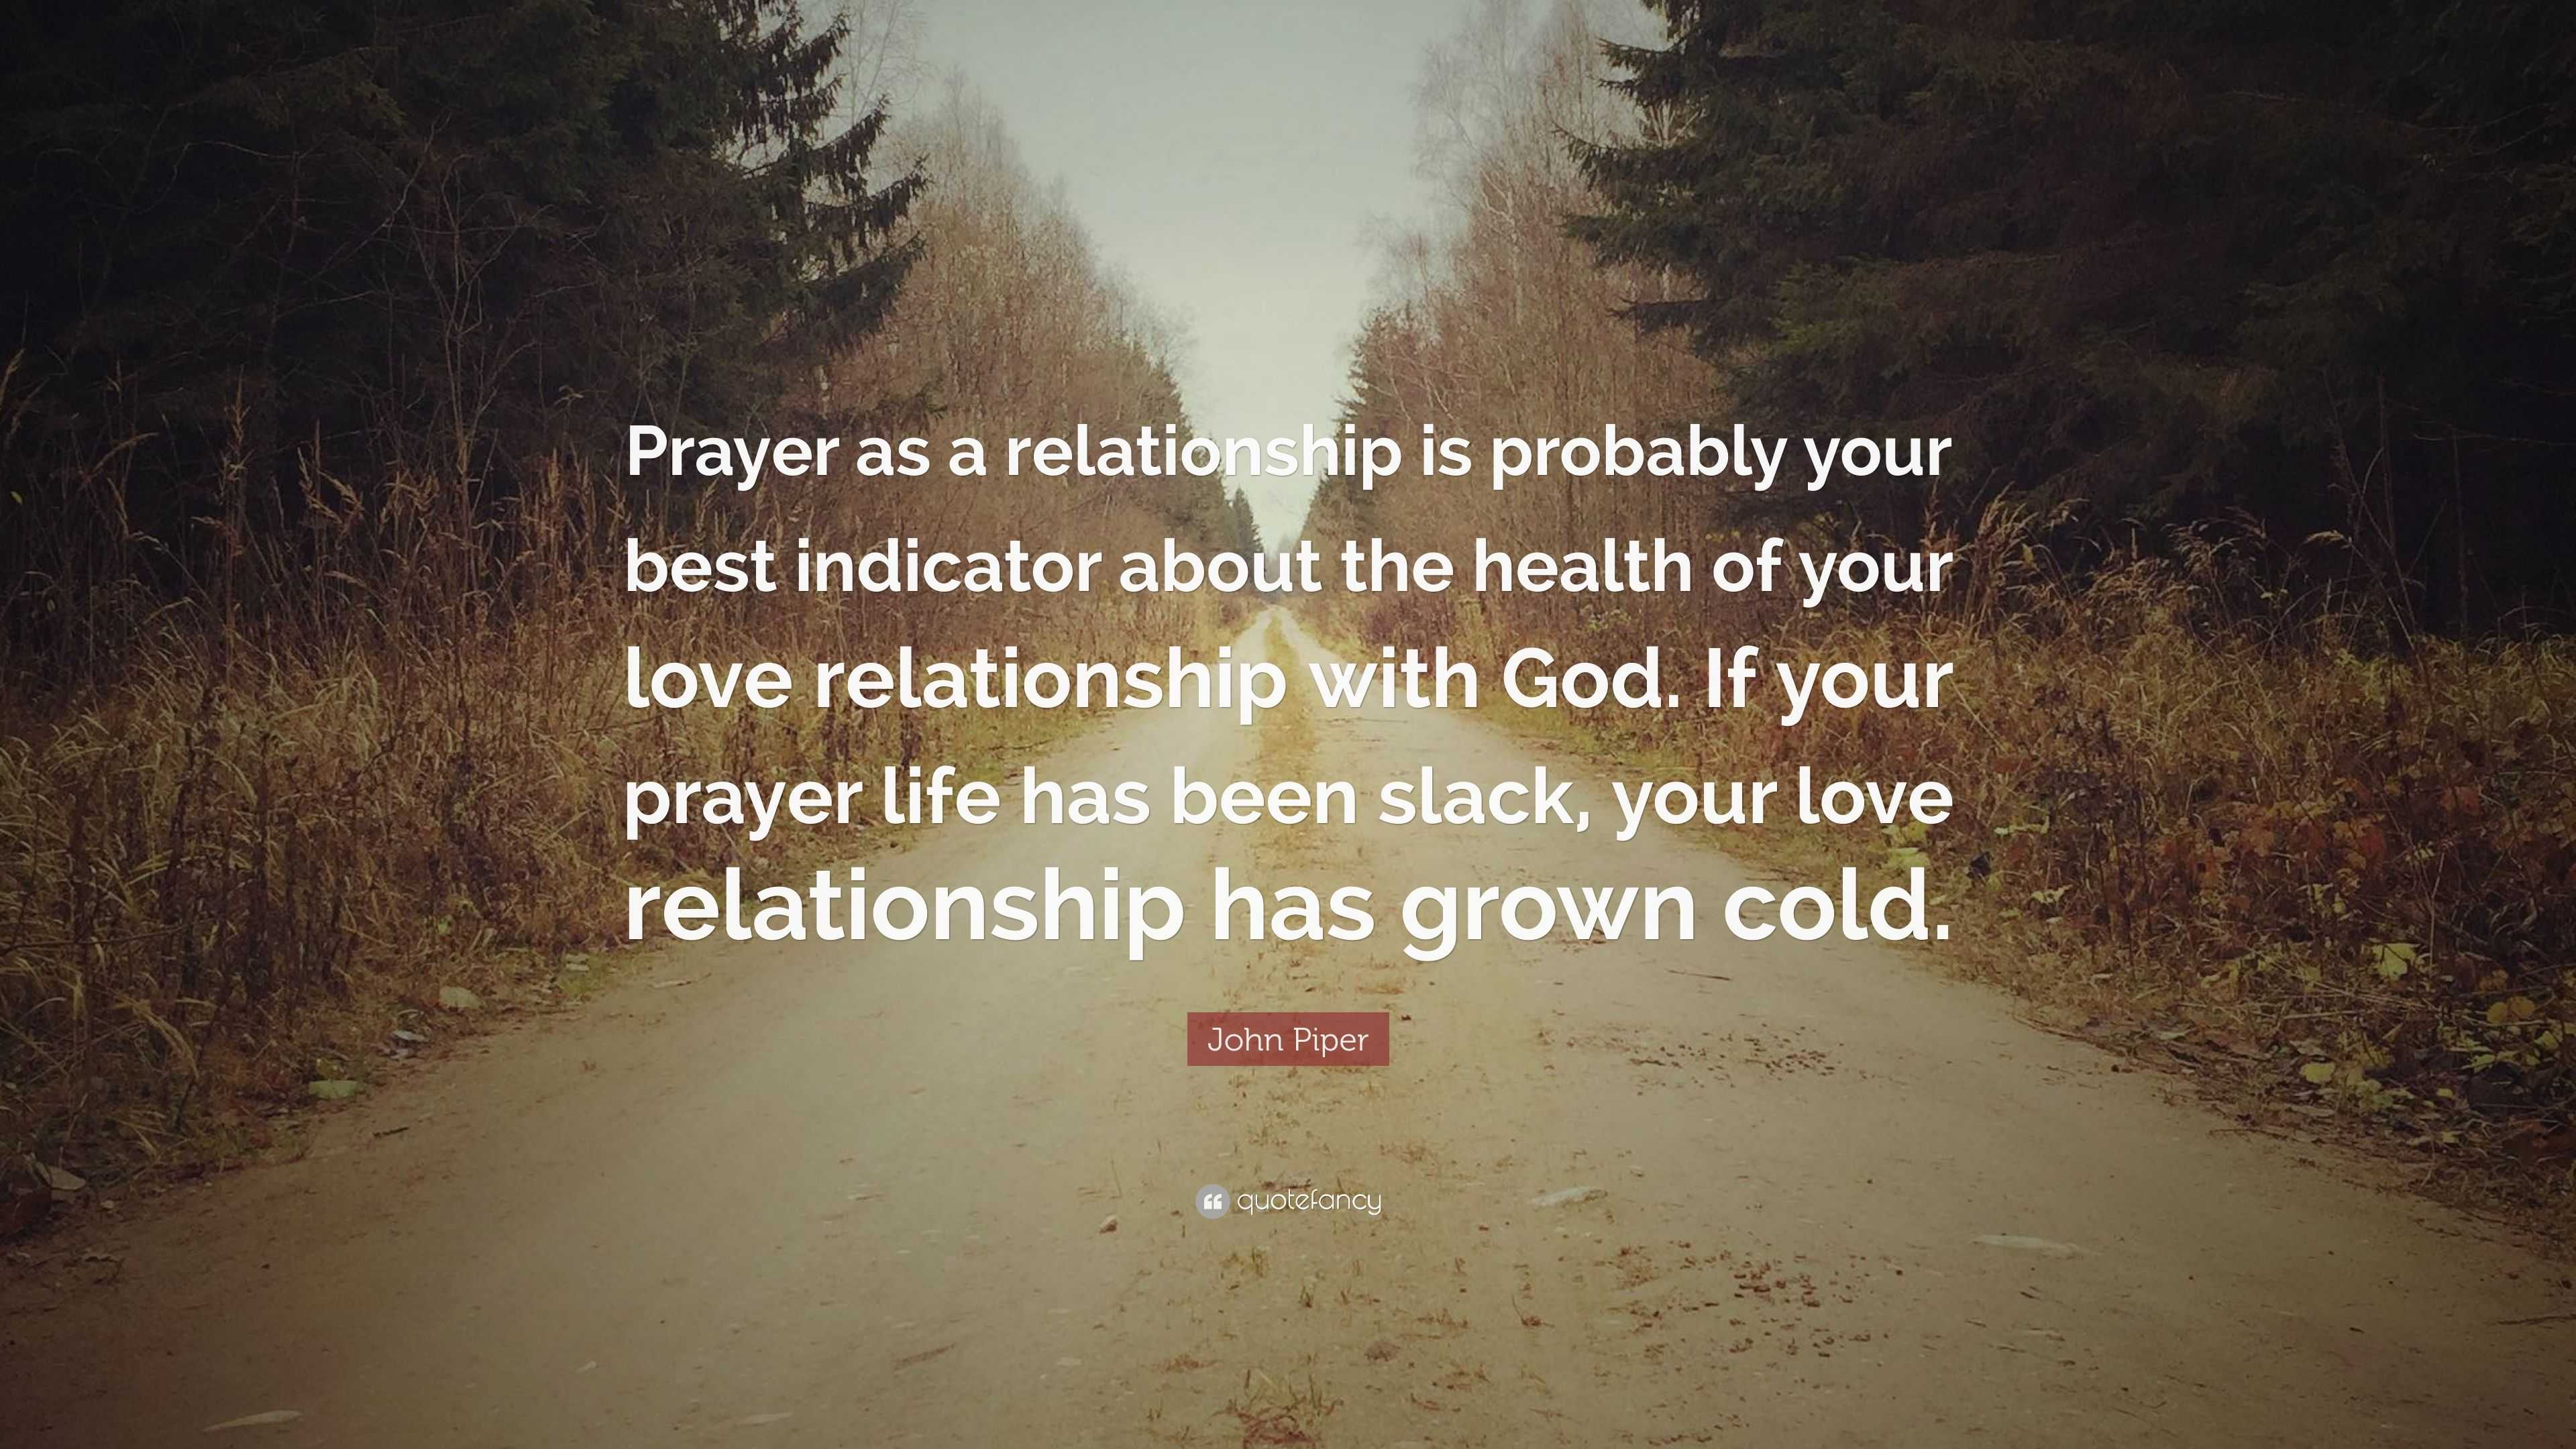 john piper quote prayer as a relationship is probably your best indicator about the health of your love relationship with god if your pr 7 wallpapers quotefancy prayer as a relationship is probably